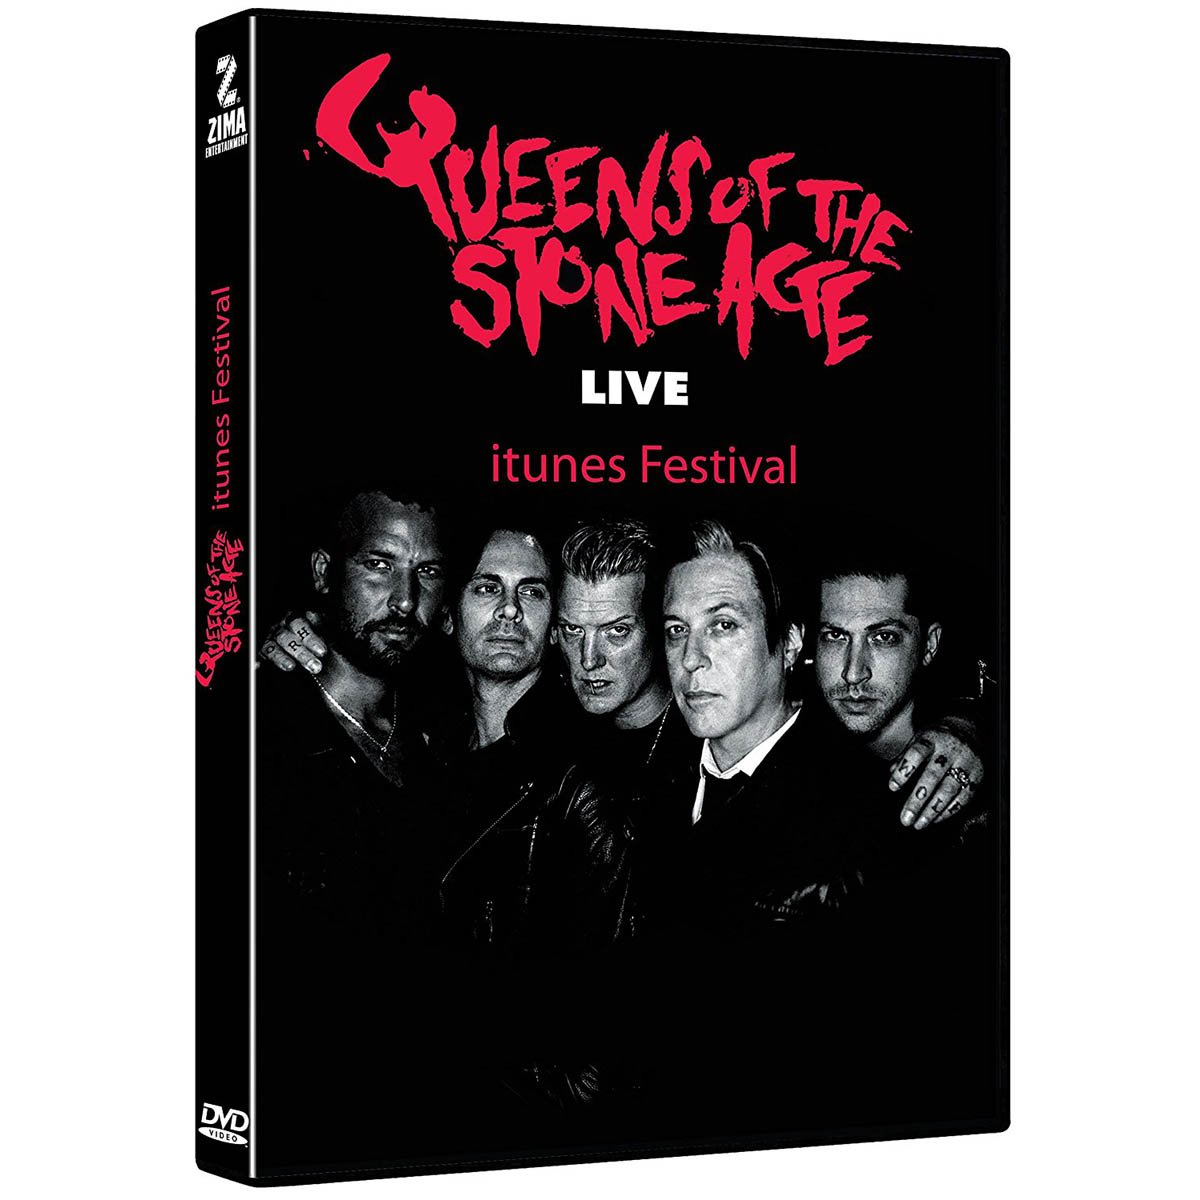 Dvd Queen Of Stone Age Live Itunes